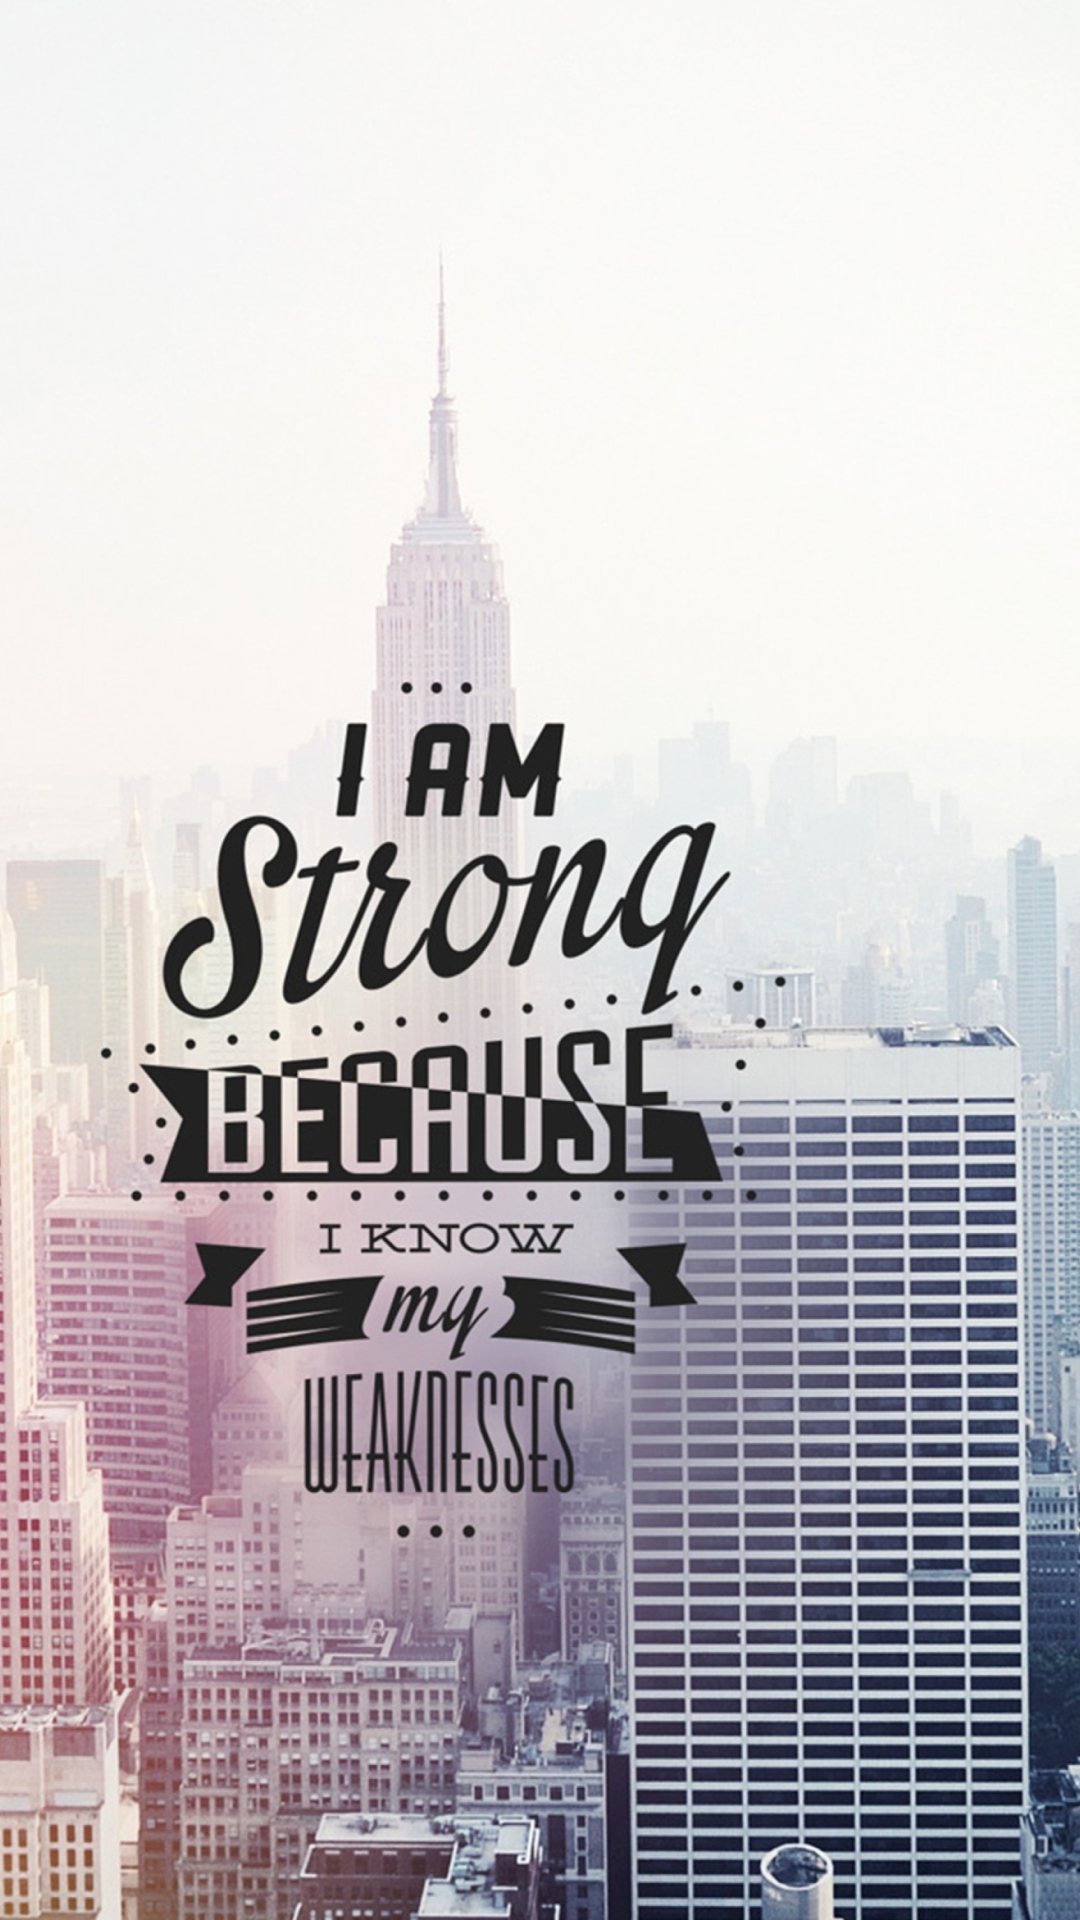 I am strong because i know my weakness wallpaper 1080x1920